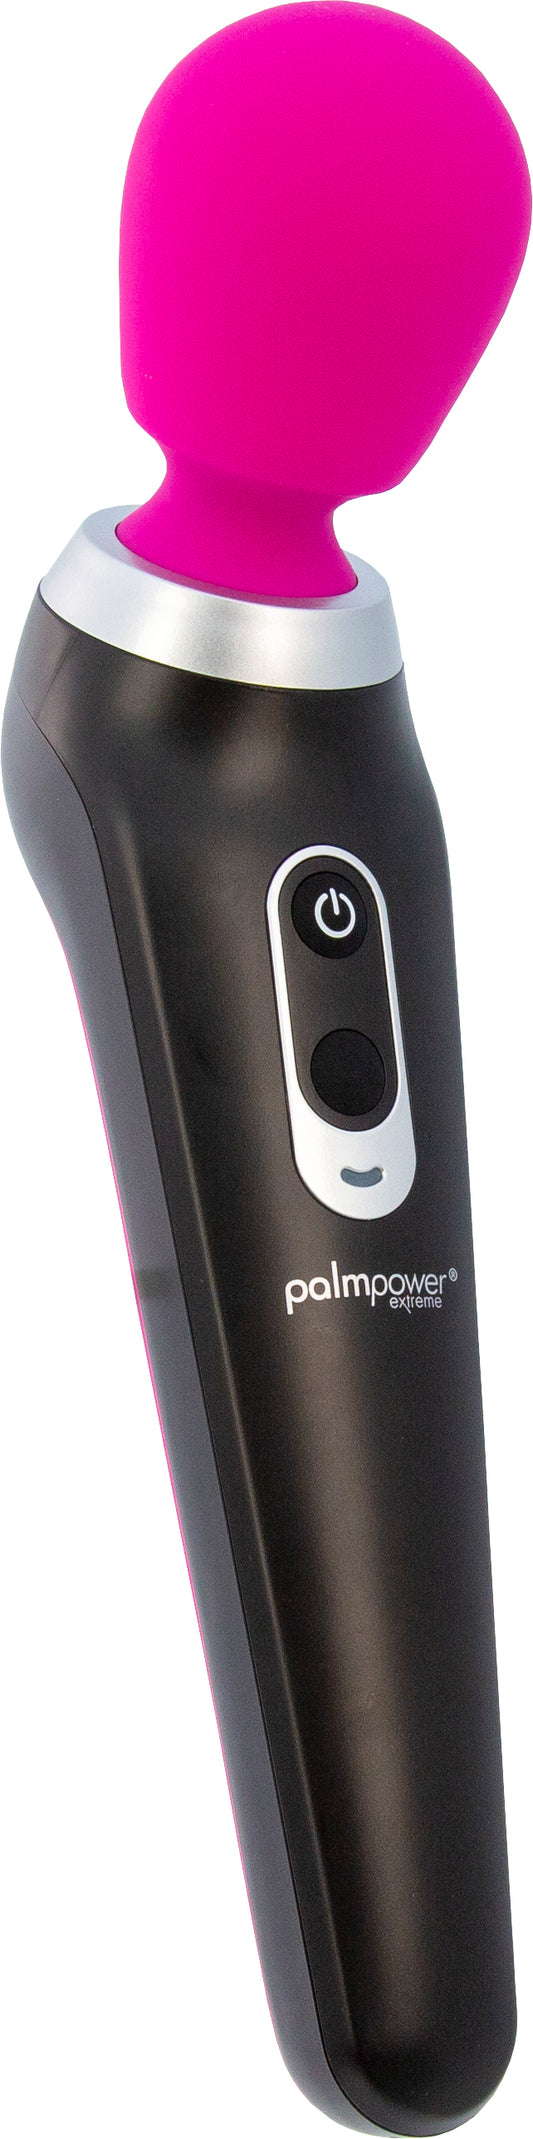 Palm Power Extreme Fuchsia - Just for you desires